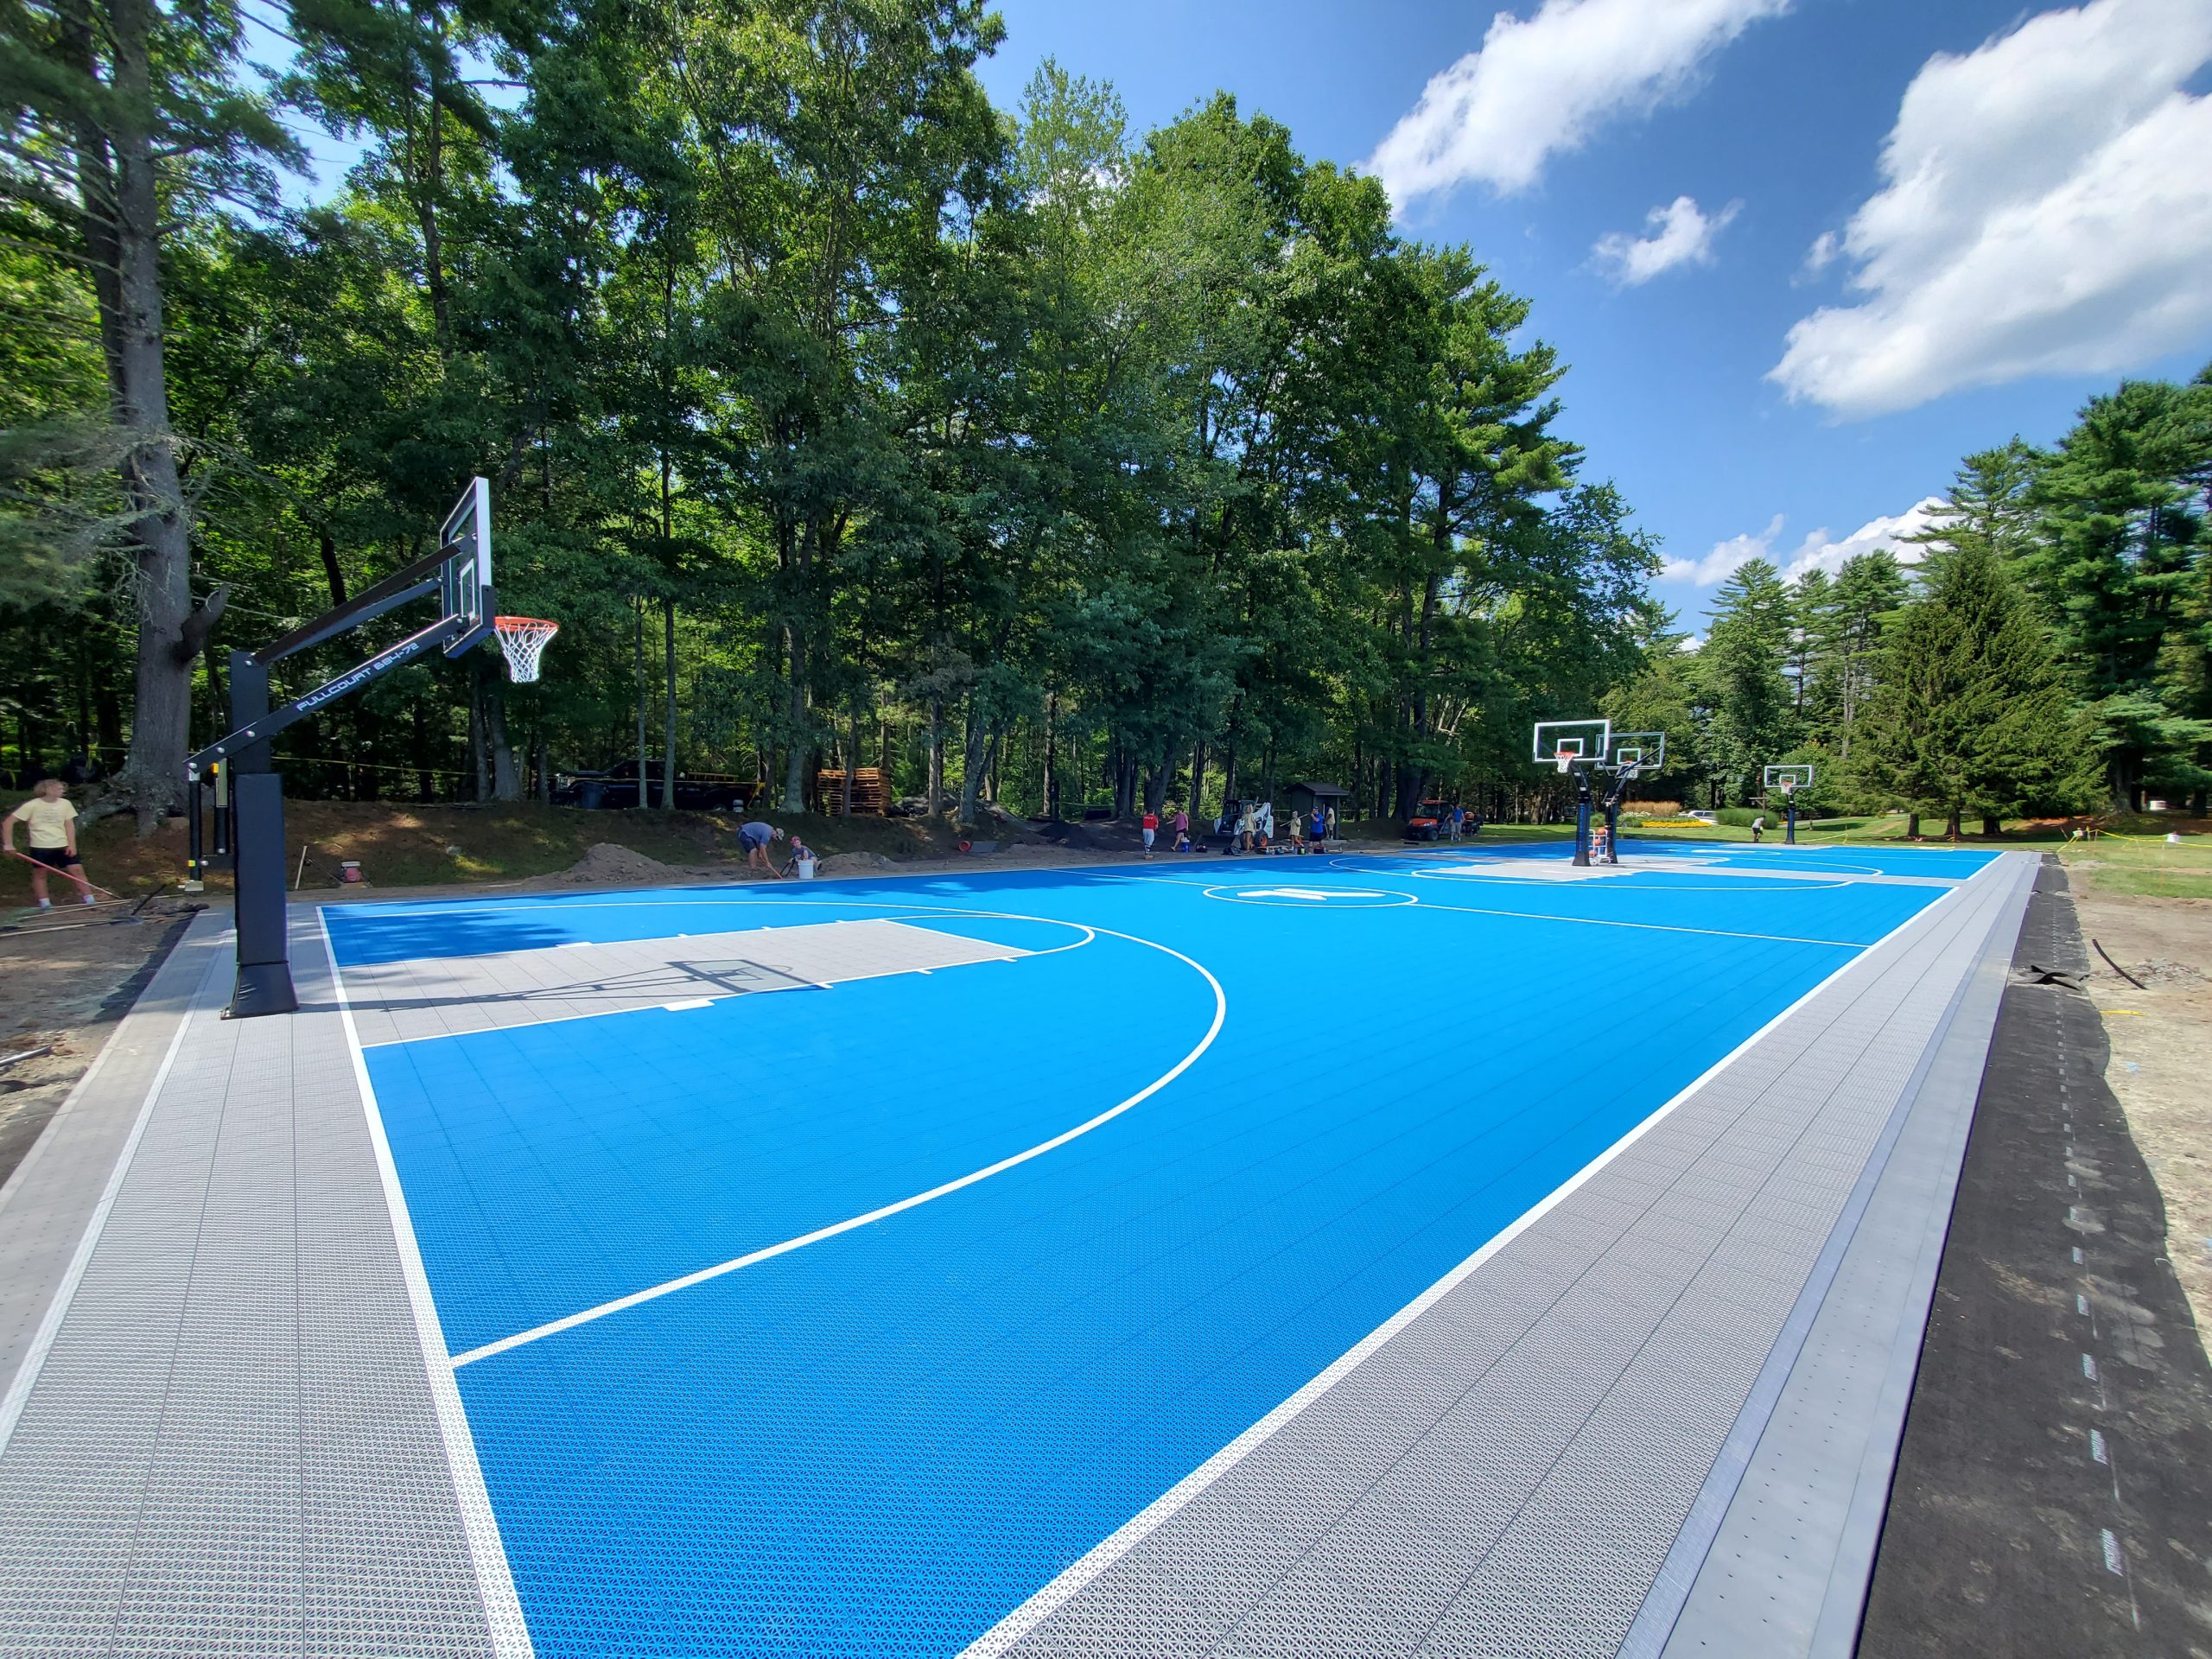 Gym Basketball Backboards- Sizes and Materials – My Backyard Sports